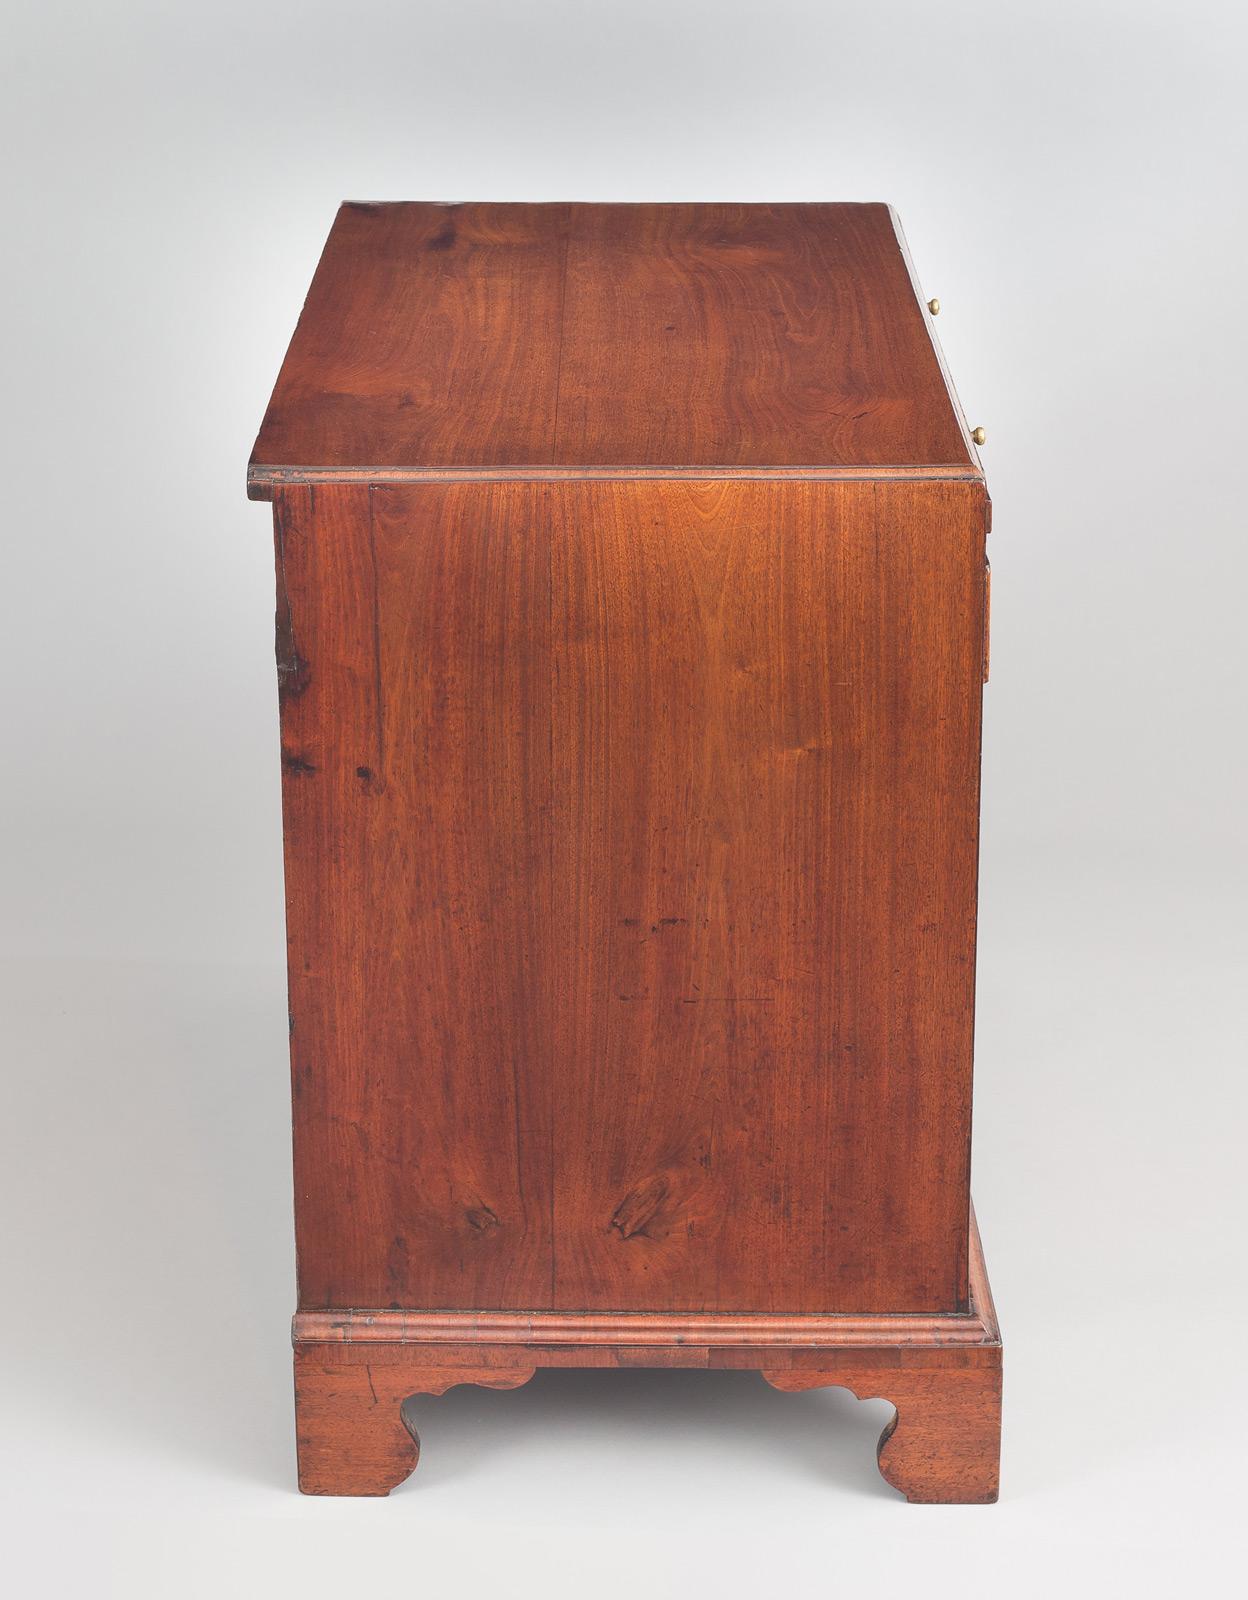 George III mahogany caddy-top bachelor’s chest with four graduated drawers, a brushing slide with green baize liner, original brass hardware, escutcheons and key, raised on shaped bracket feet. Beautiful patina and color.